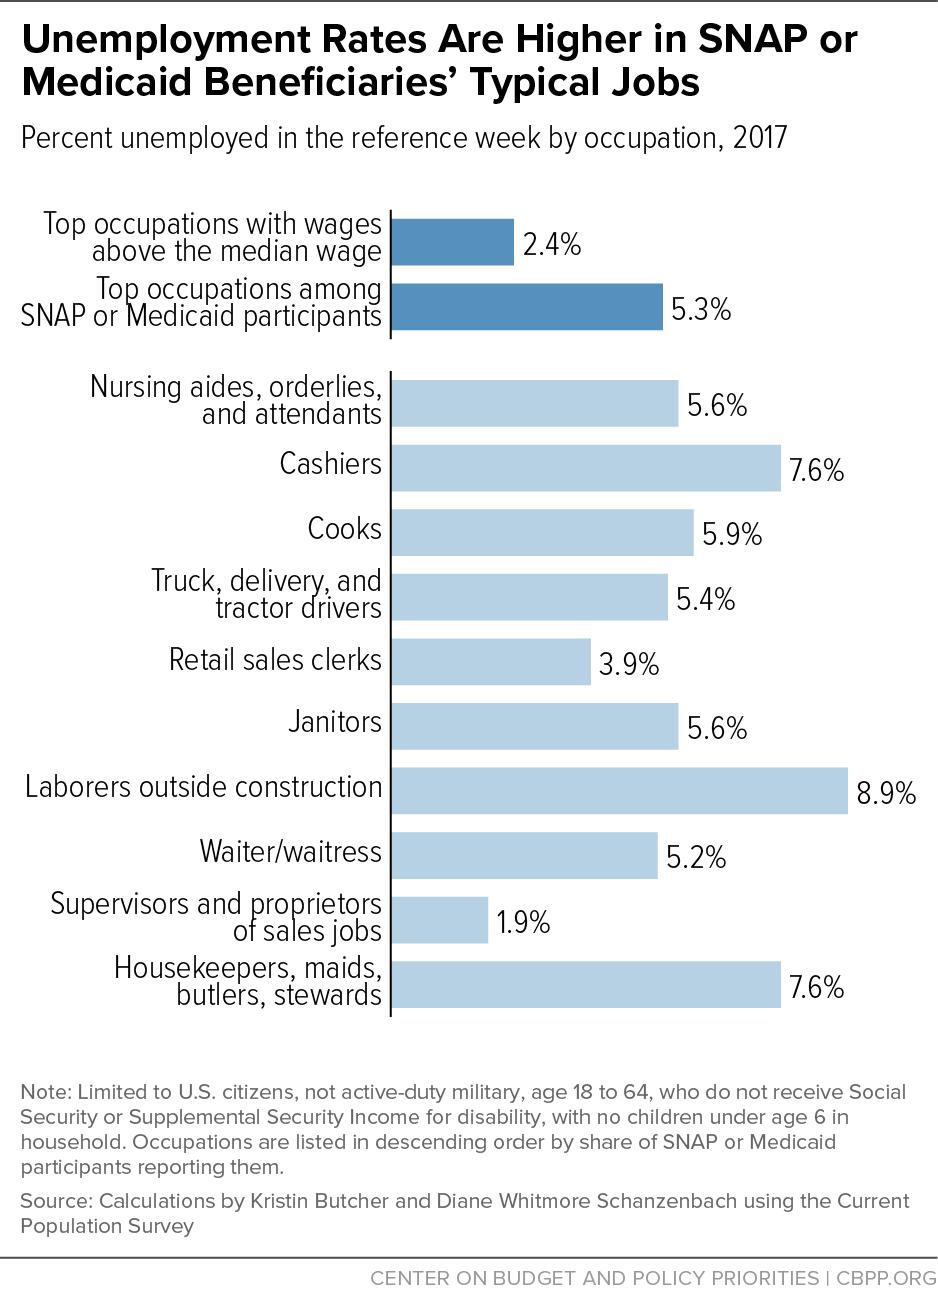 Figure 10 shows the unemployment rate for the two groups of occupations in 2017, as well as the top ten occupations individually for SNAP or Medicaid beneficiaries.